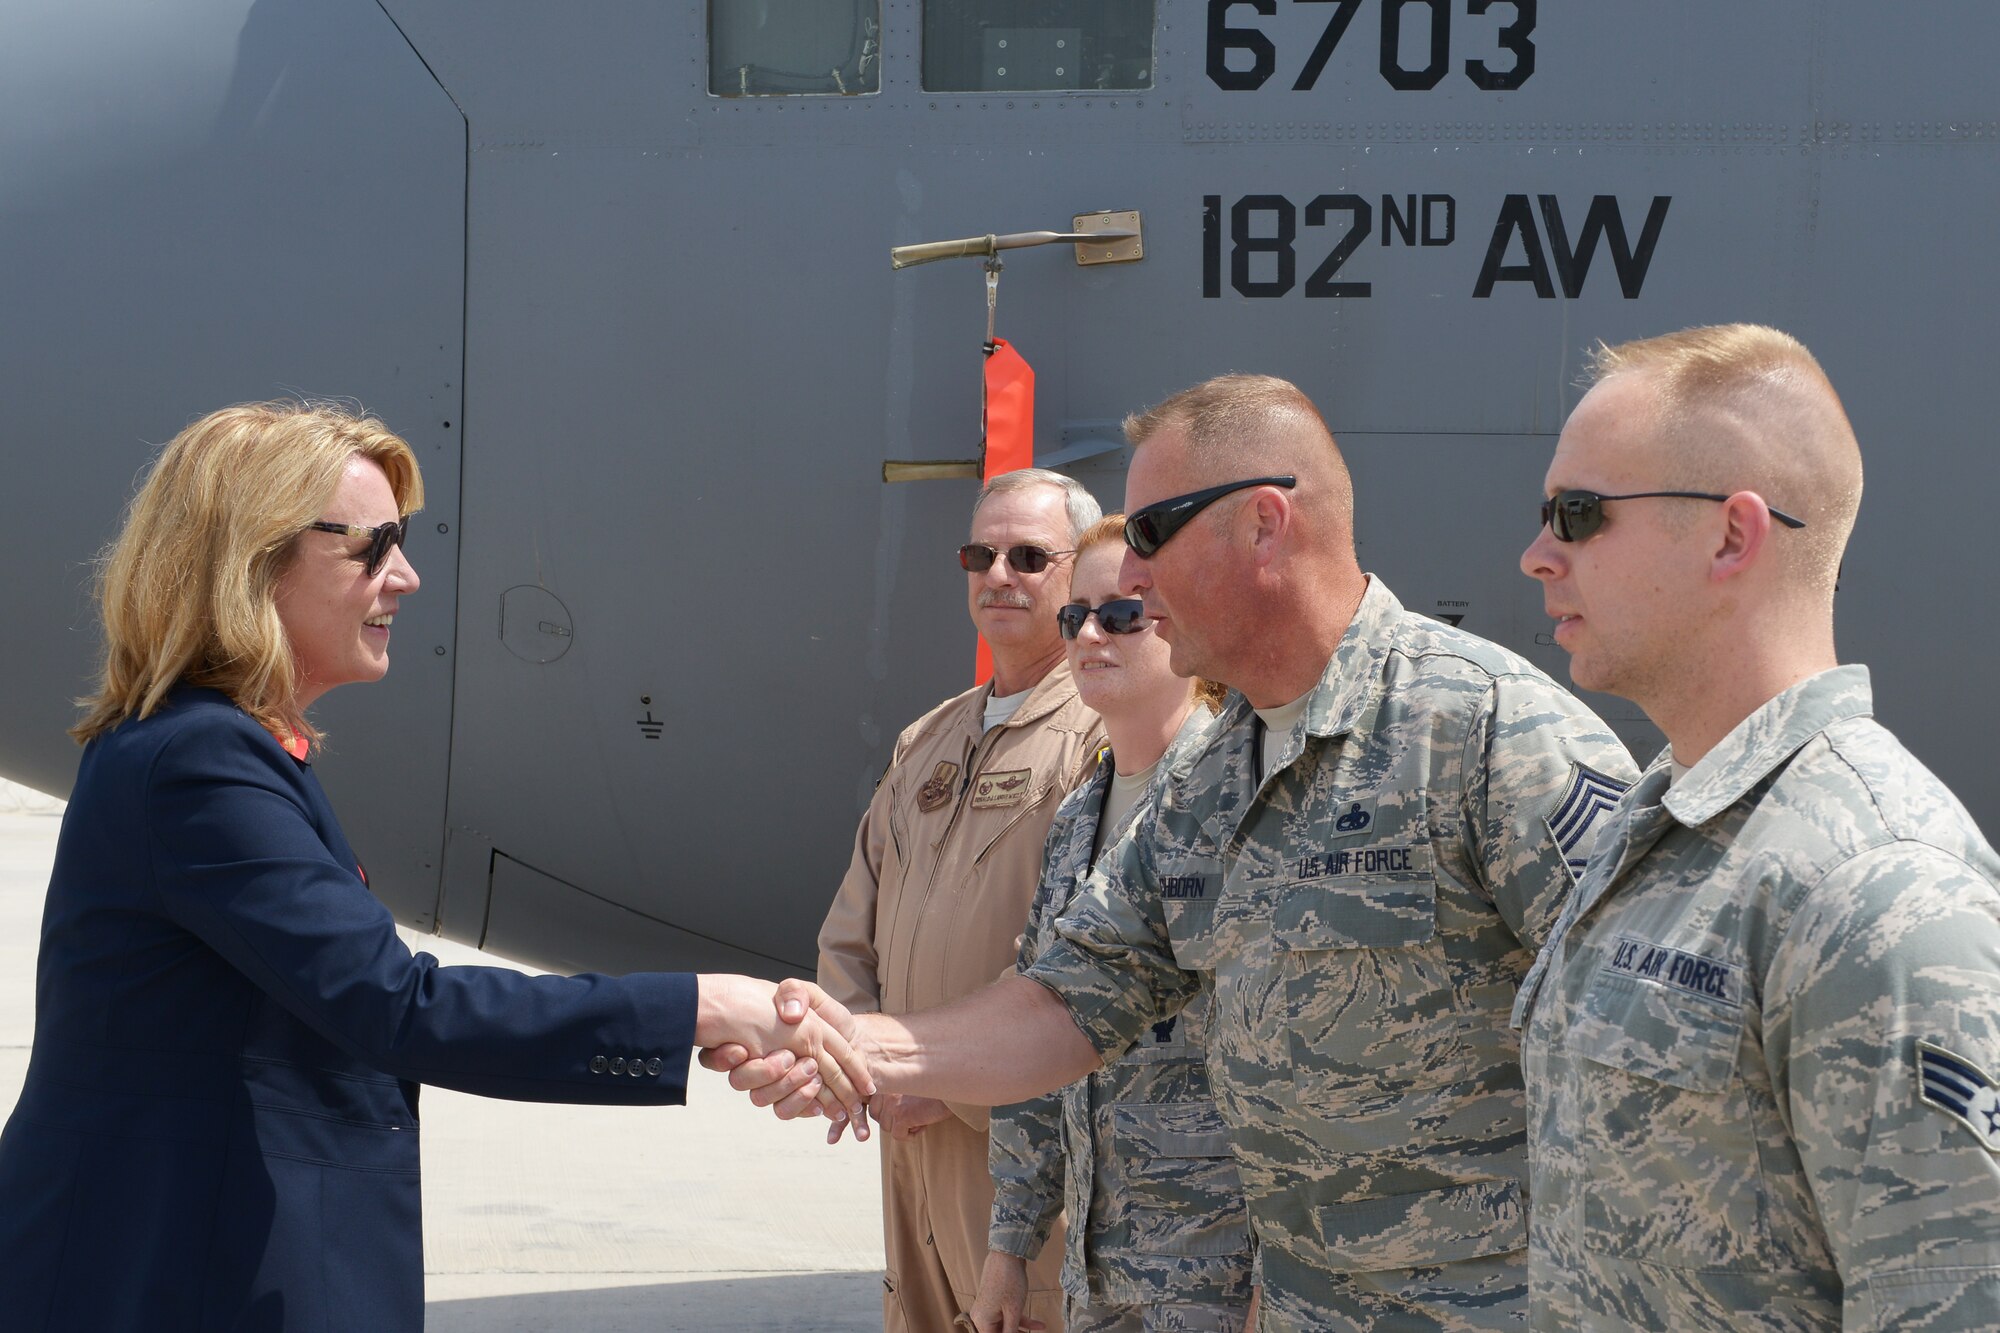 Secretary of the Air Force Deborah Lee James shakes hands with Chief Master Sgt. David Eschborn as she meets members of the 746th Expeditionary Airlift Squadron at Al Udeid Air Base, Qatar, Mar. 19, 2014. James and other senior leaders visited flying units assigned to 379th Air Expeditionary Wing and learned about their mission in support of Operation Enduring Freedom. This was James first visit to AUAB and she also held an all call to talk to Airmen about her three priorities for the Air Force: taking care of people, balancing readiness of today with readiness of tomorrow and making every dollar count. Eschborn is the 746th Aircraft Maintenance Unit NCO in charge deployed from Niagara Falls Air Reserve Station, N.Y., and a Buffalo, N.Y., native. (U.S. Air Force photo/Master Sgt. David Miller)